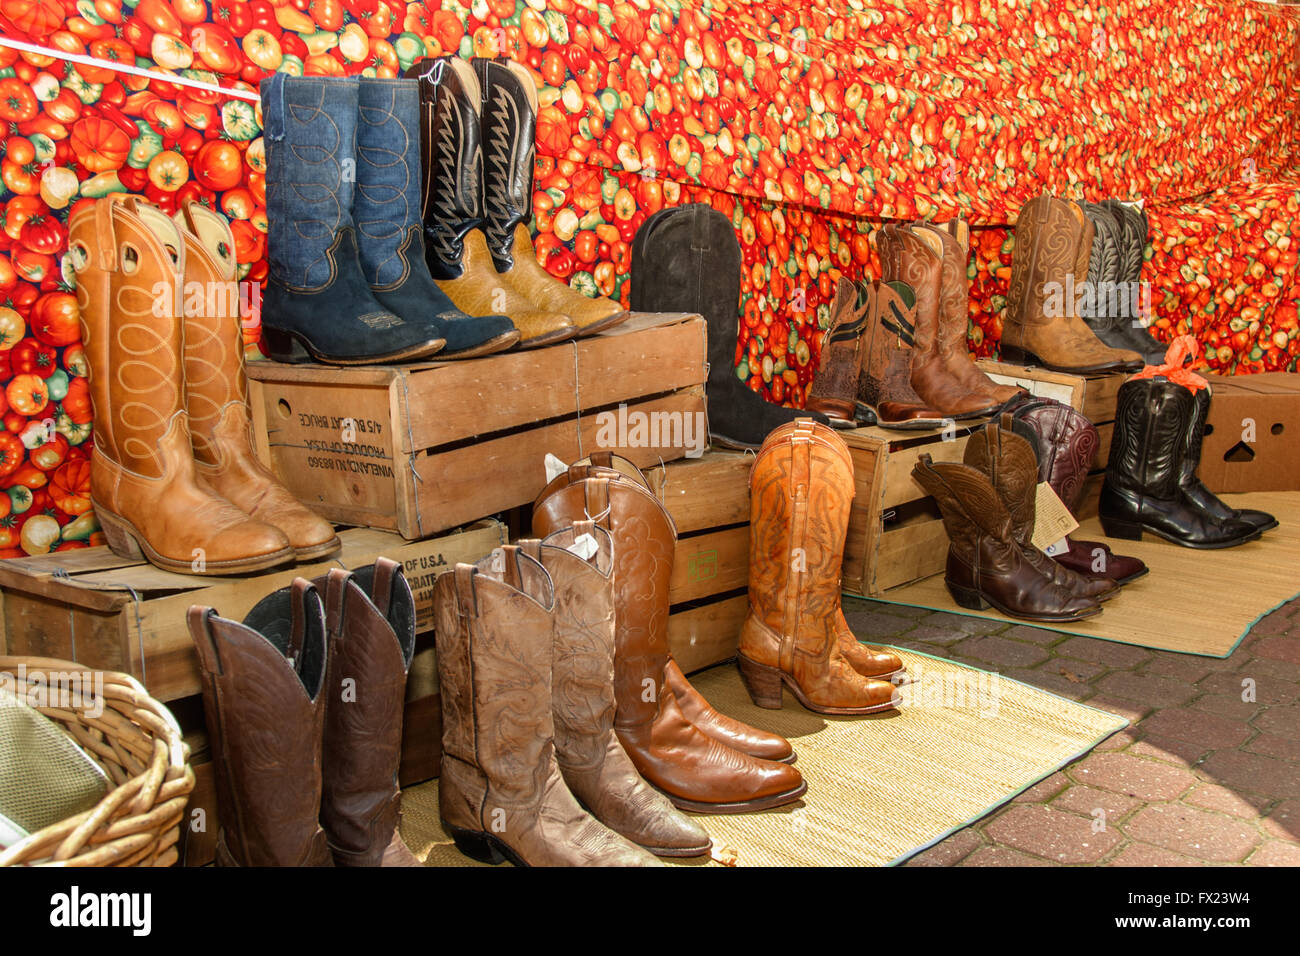 WESTERN BOOTS, RICHMOND, VIRGINIA, USA - JULY, 2013.  Cowboy styled boots on sale at the Richmond Tomato Festival. Stock Photo